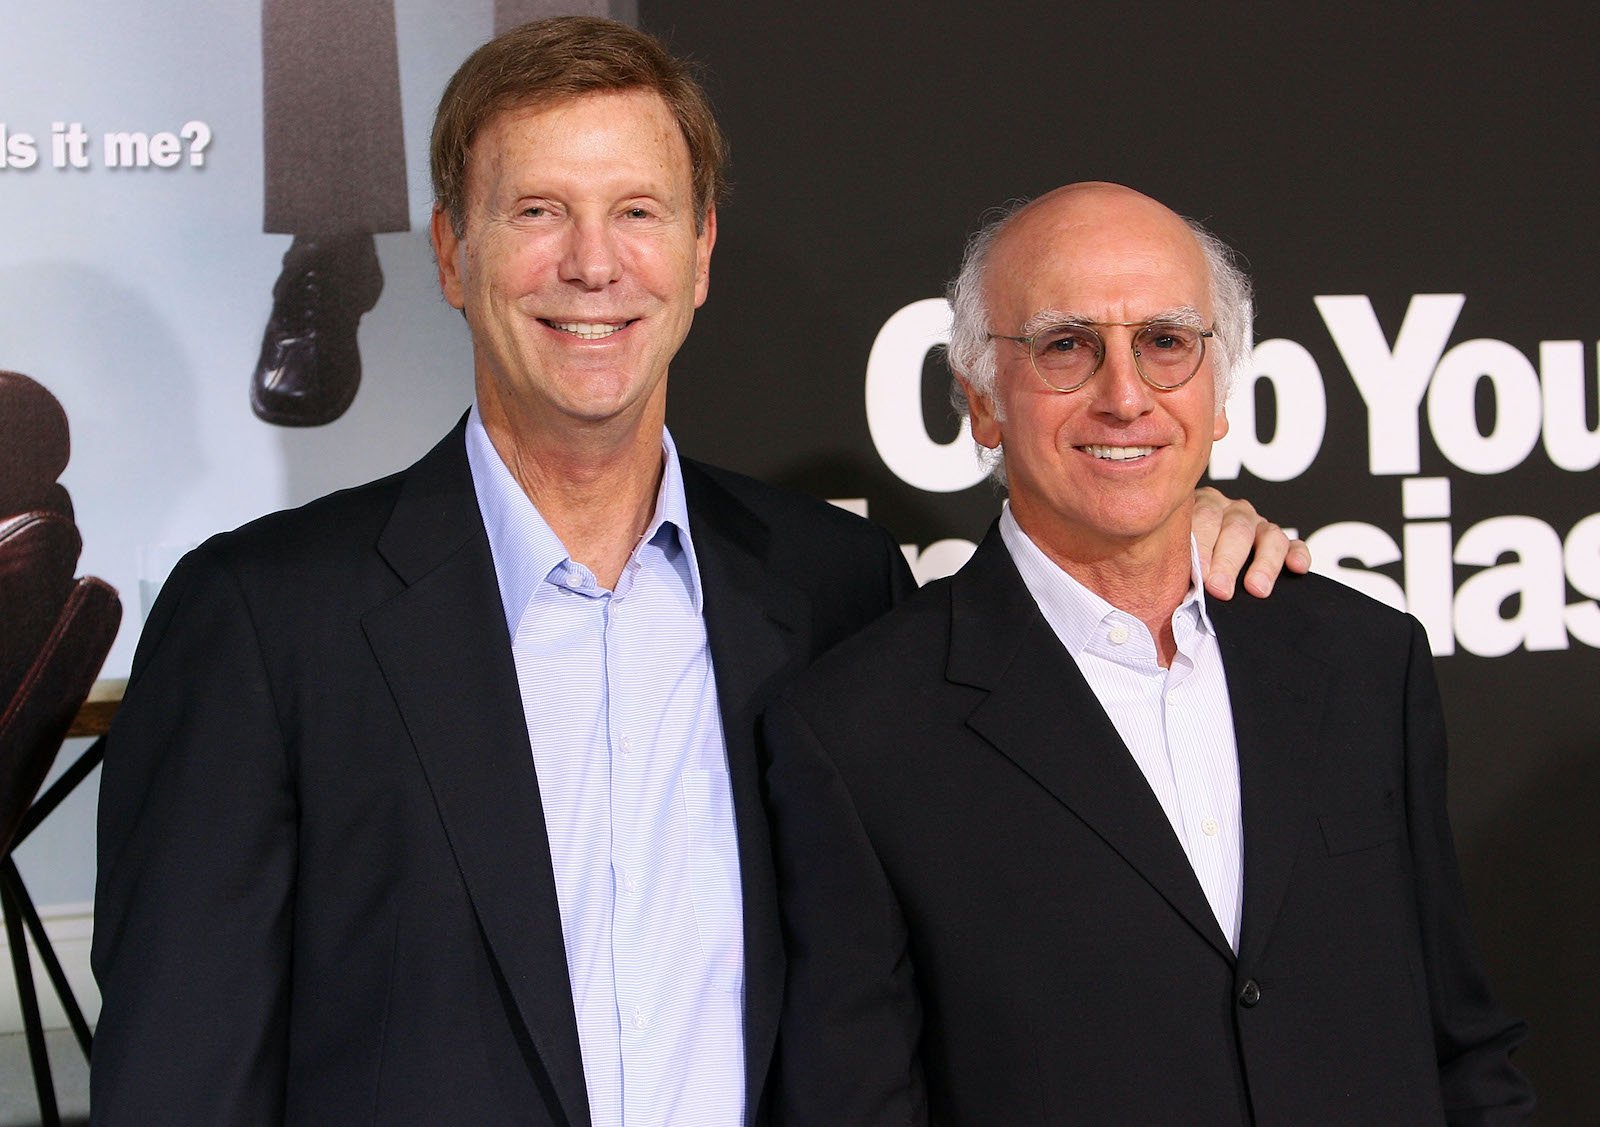 ‘Curb Your Enthusiasm’: Albert Brooks’ Appearance Is a Small Nod to Marty Funkhouser